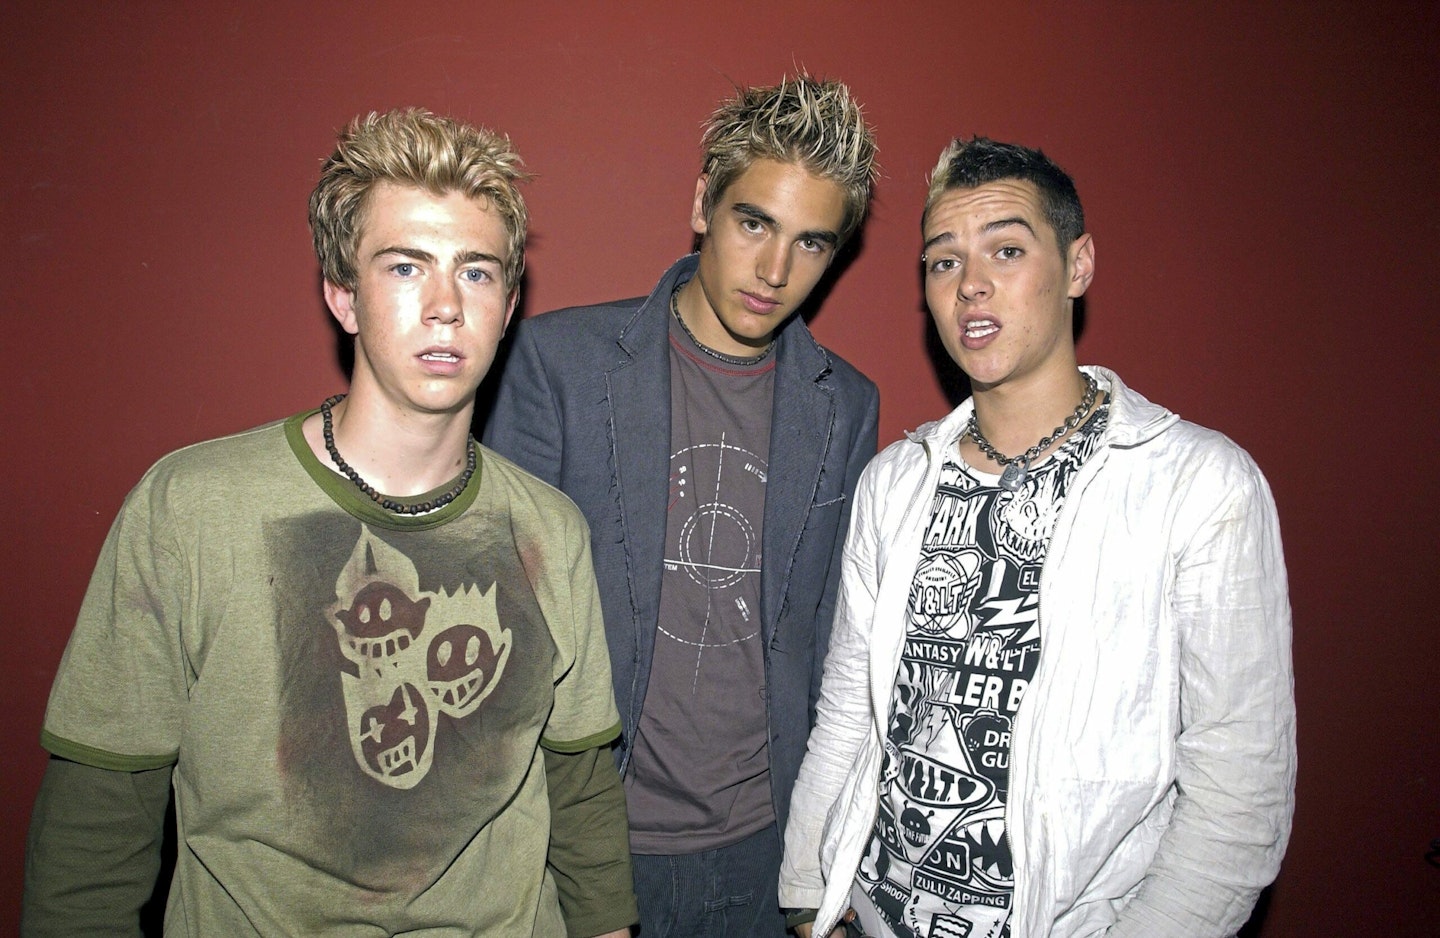 busted band in 2002